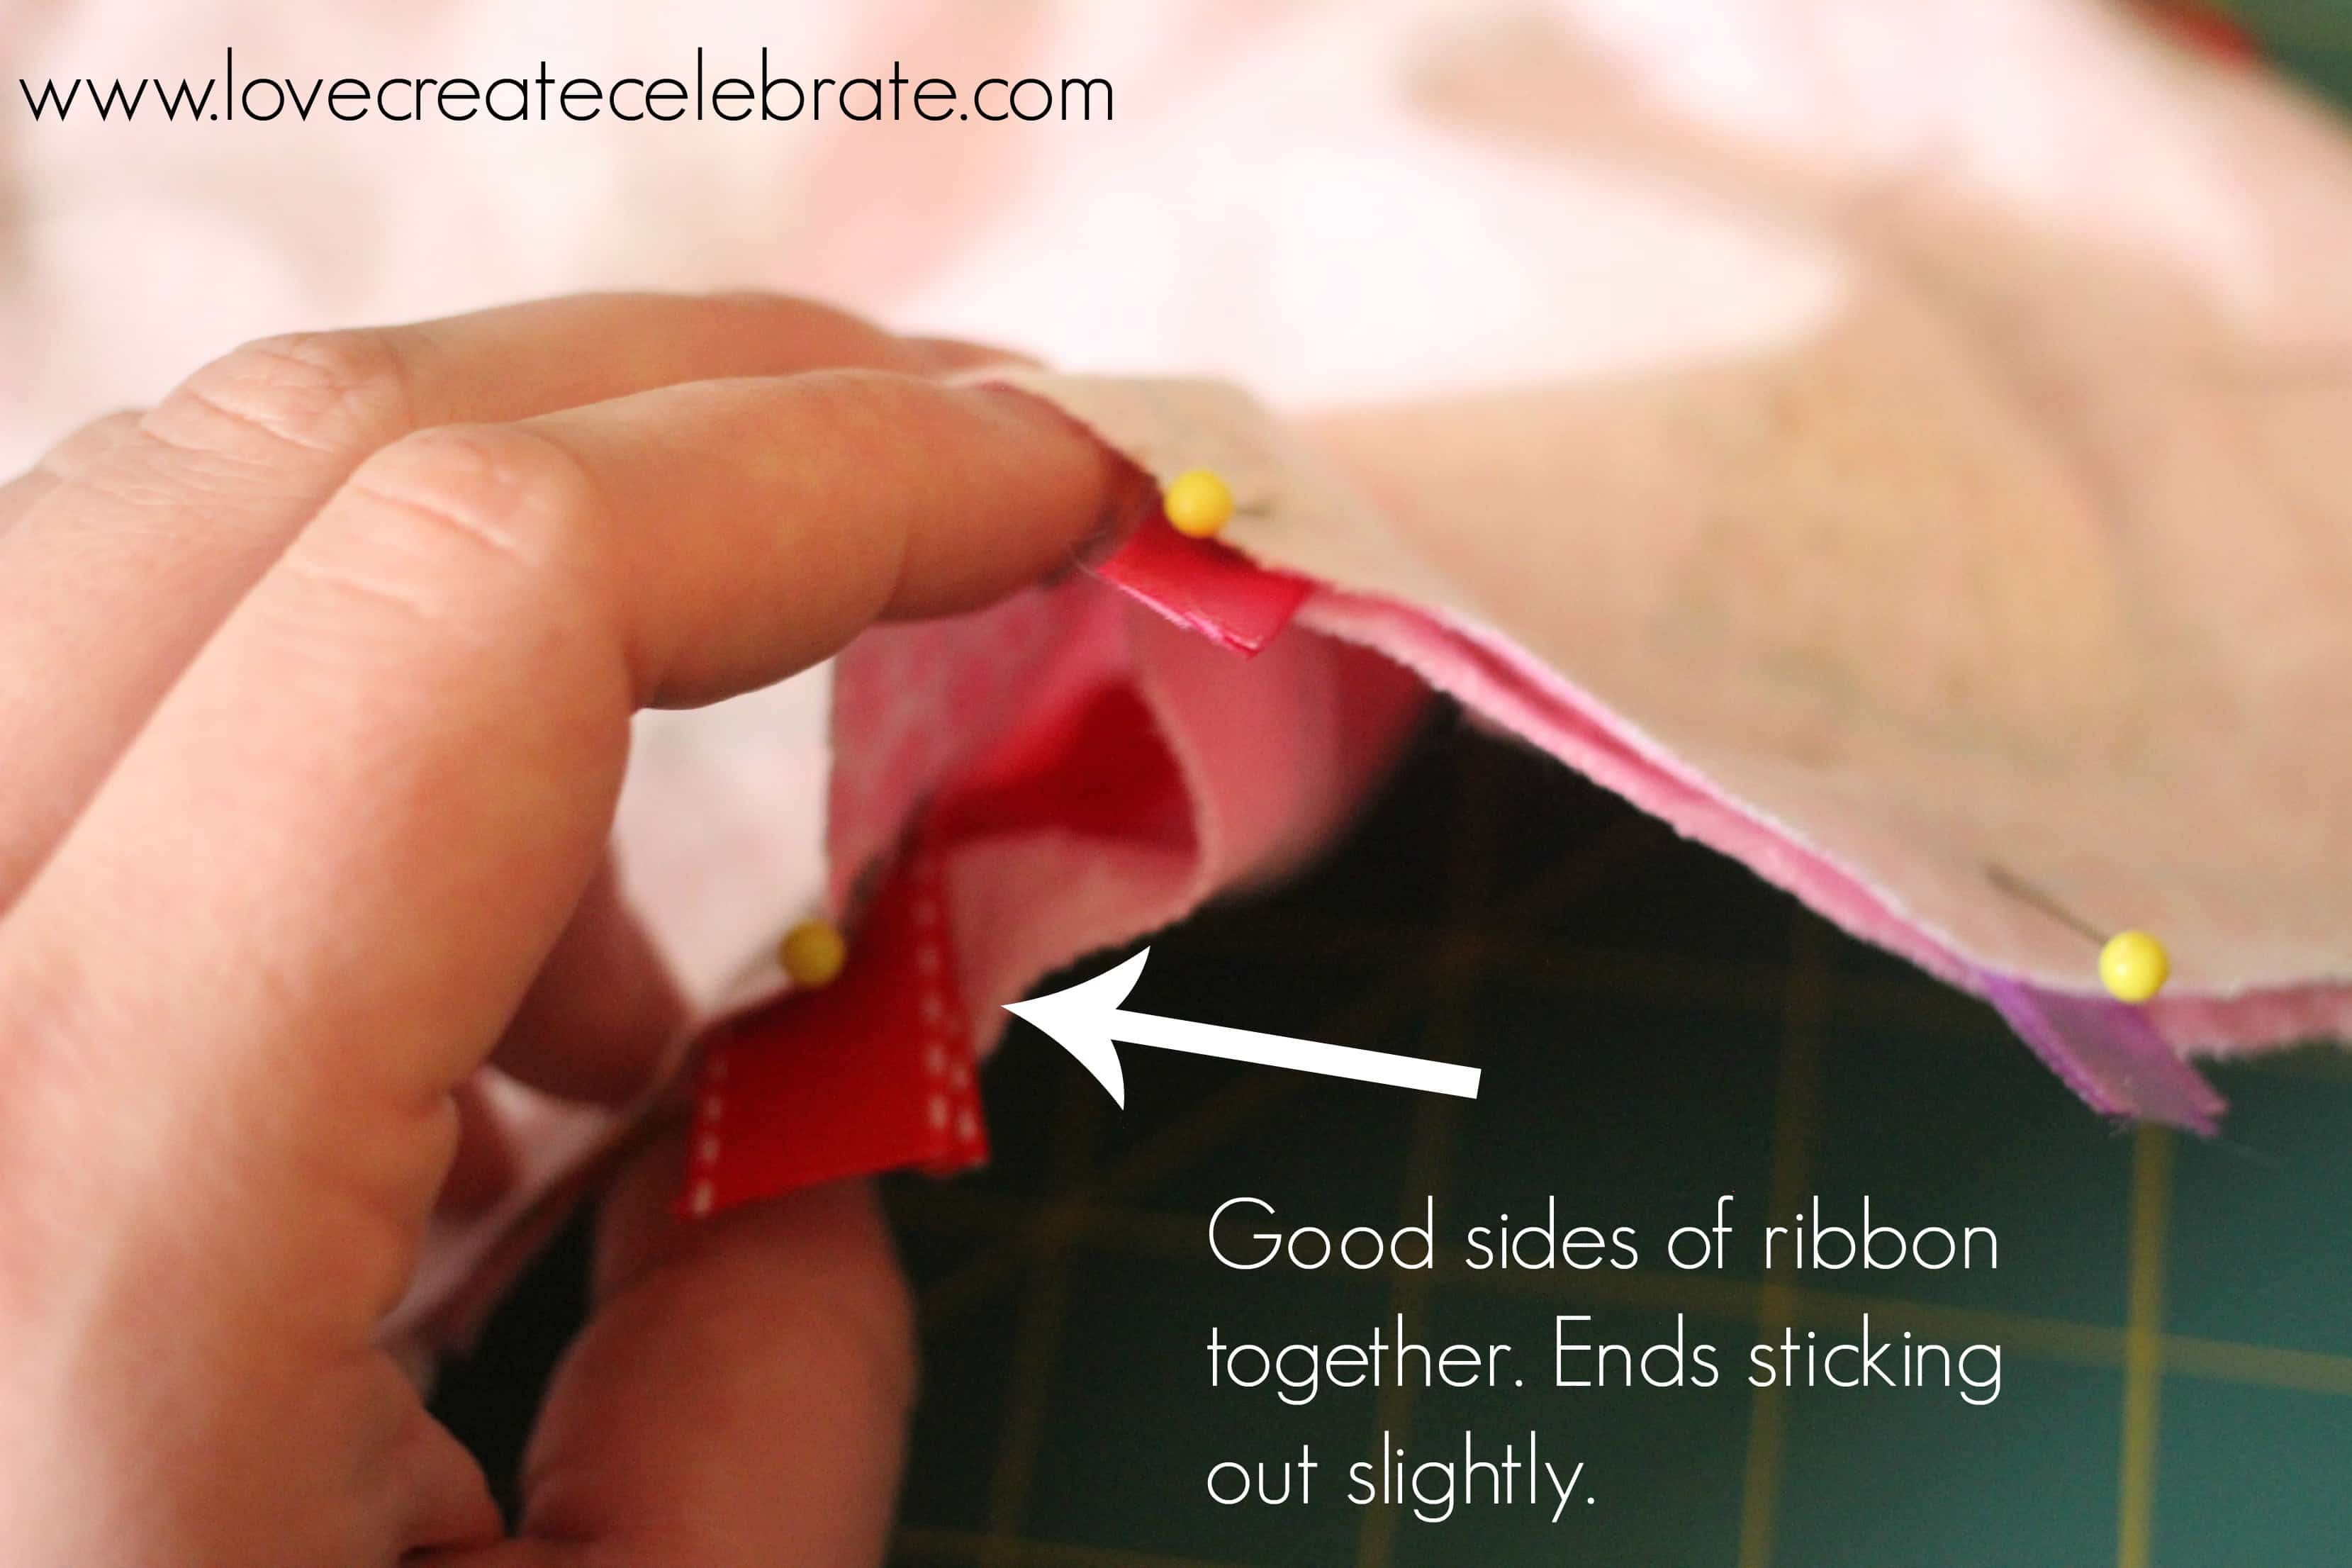 Put the good sides of the ribbon together and allow the ends to stick out slightly.